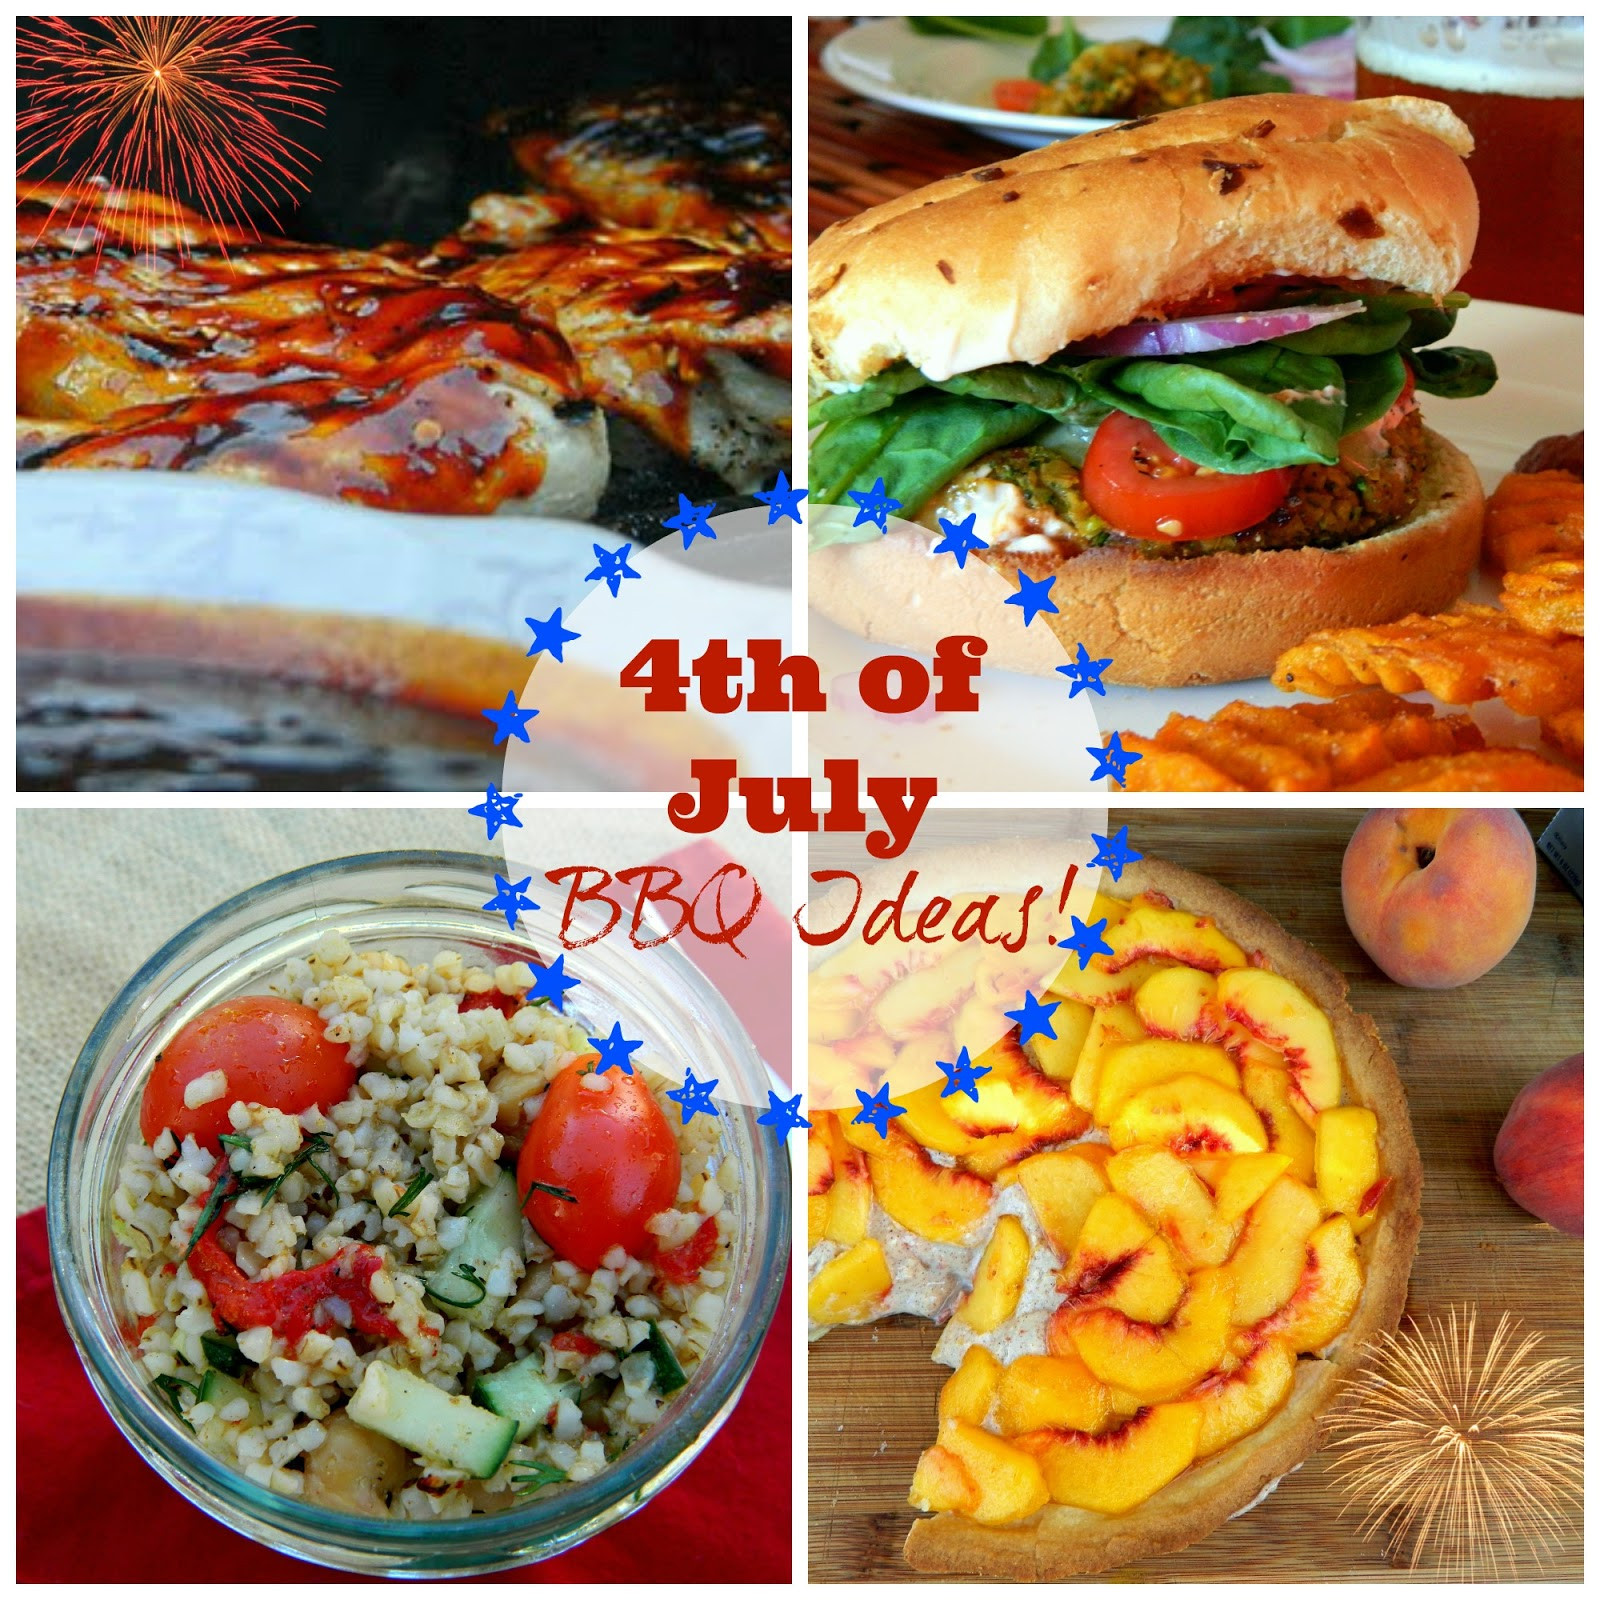 Fourth Of July Bbq Ideas
 The Cyclist s Wife 4th of July BBQ Ideas